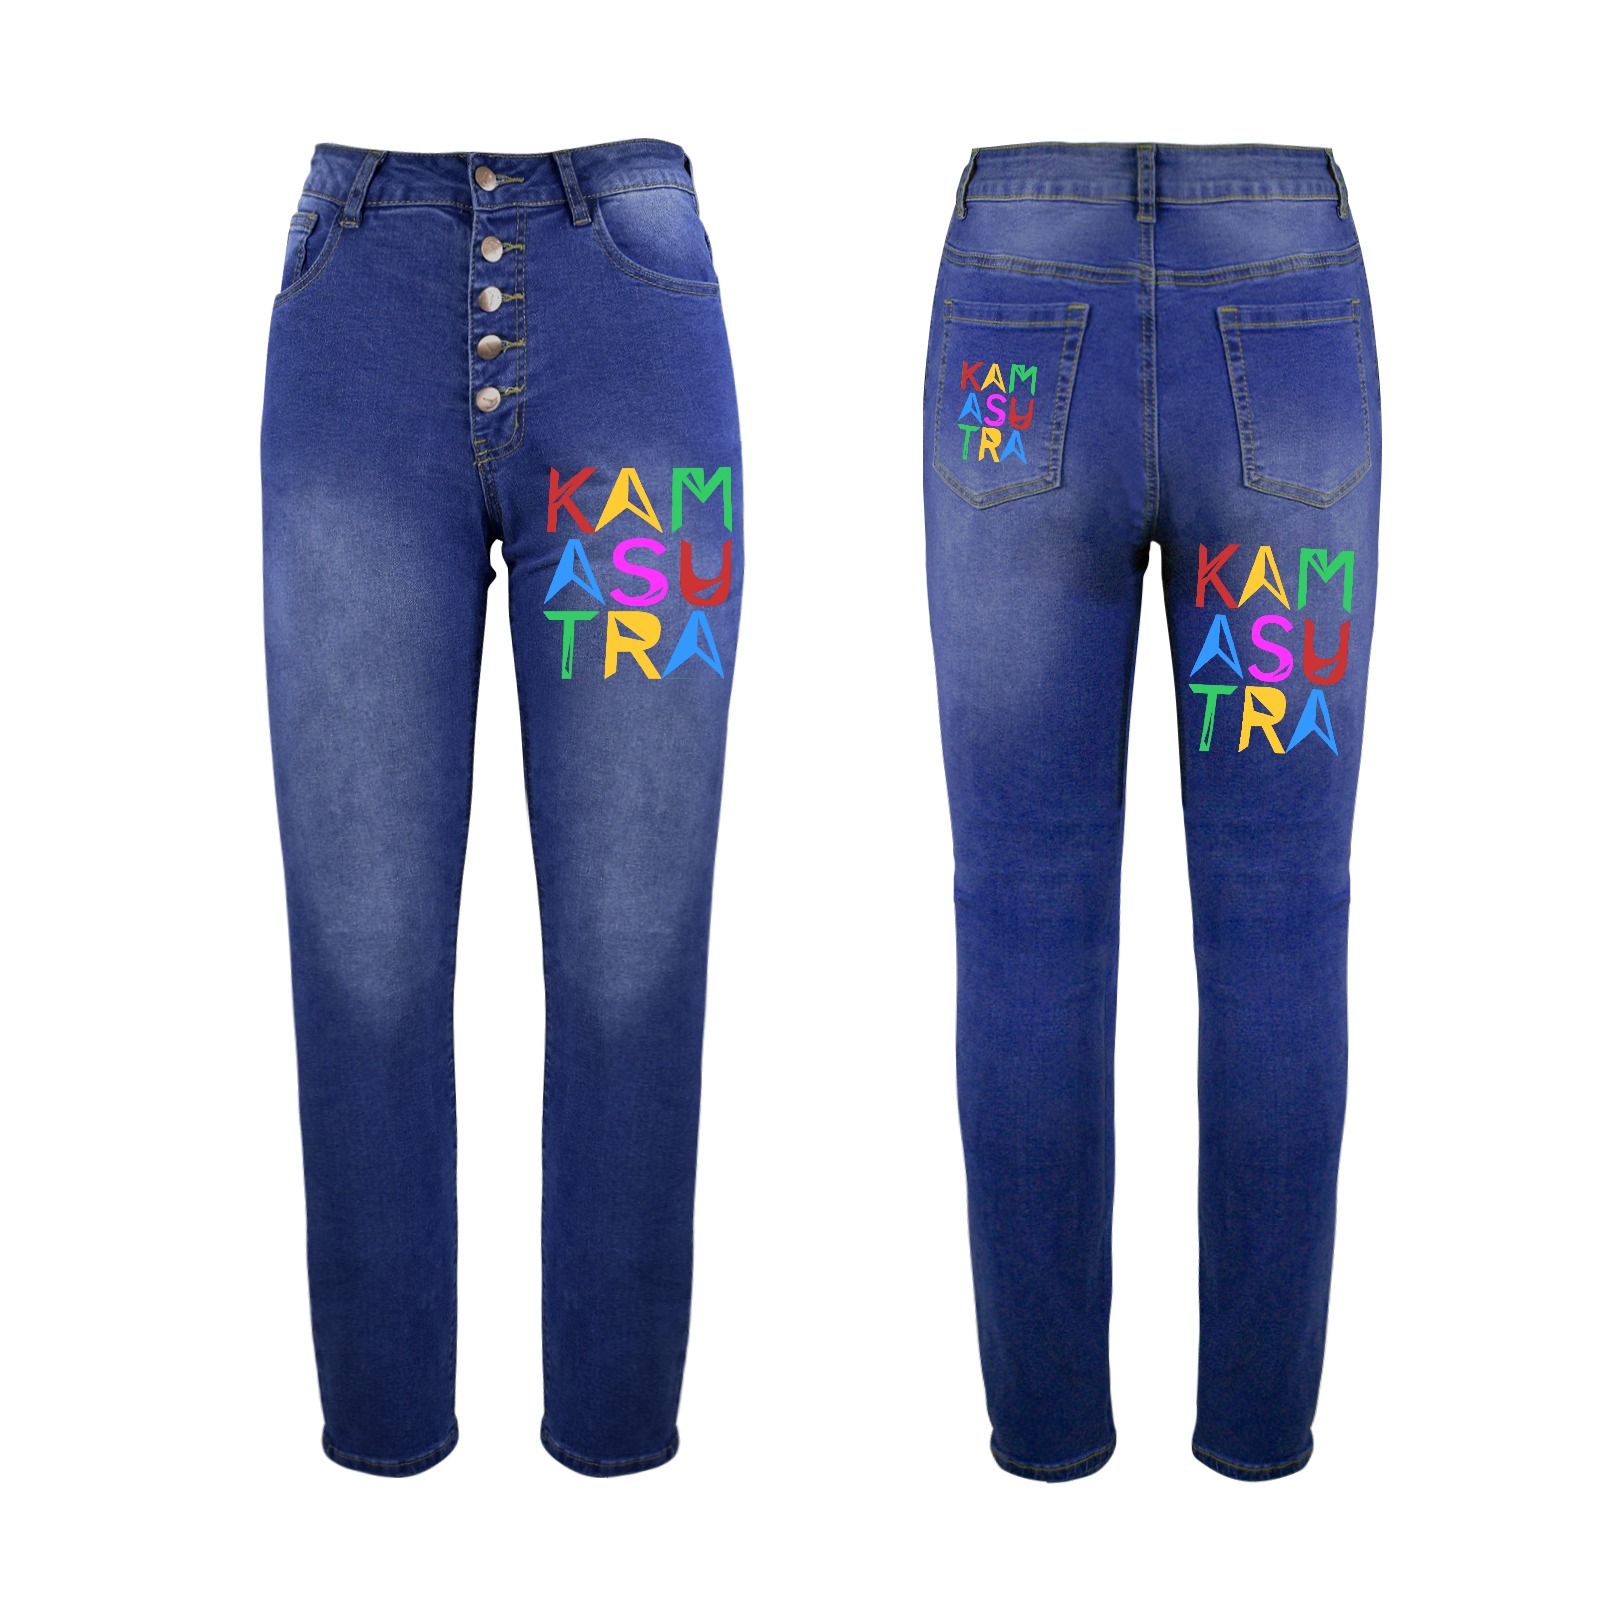 Kamasutra elegant colorful text typography art. Women's Jeans (Front&Back Printing)